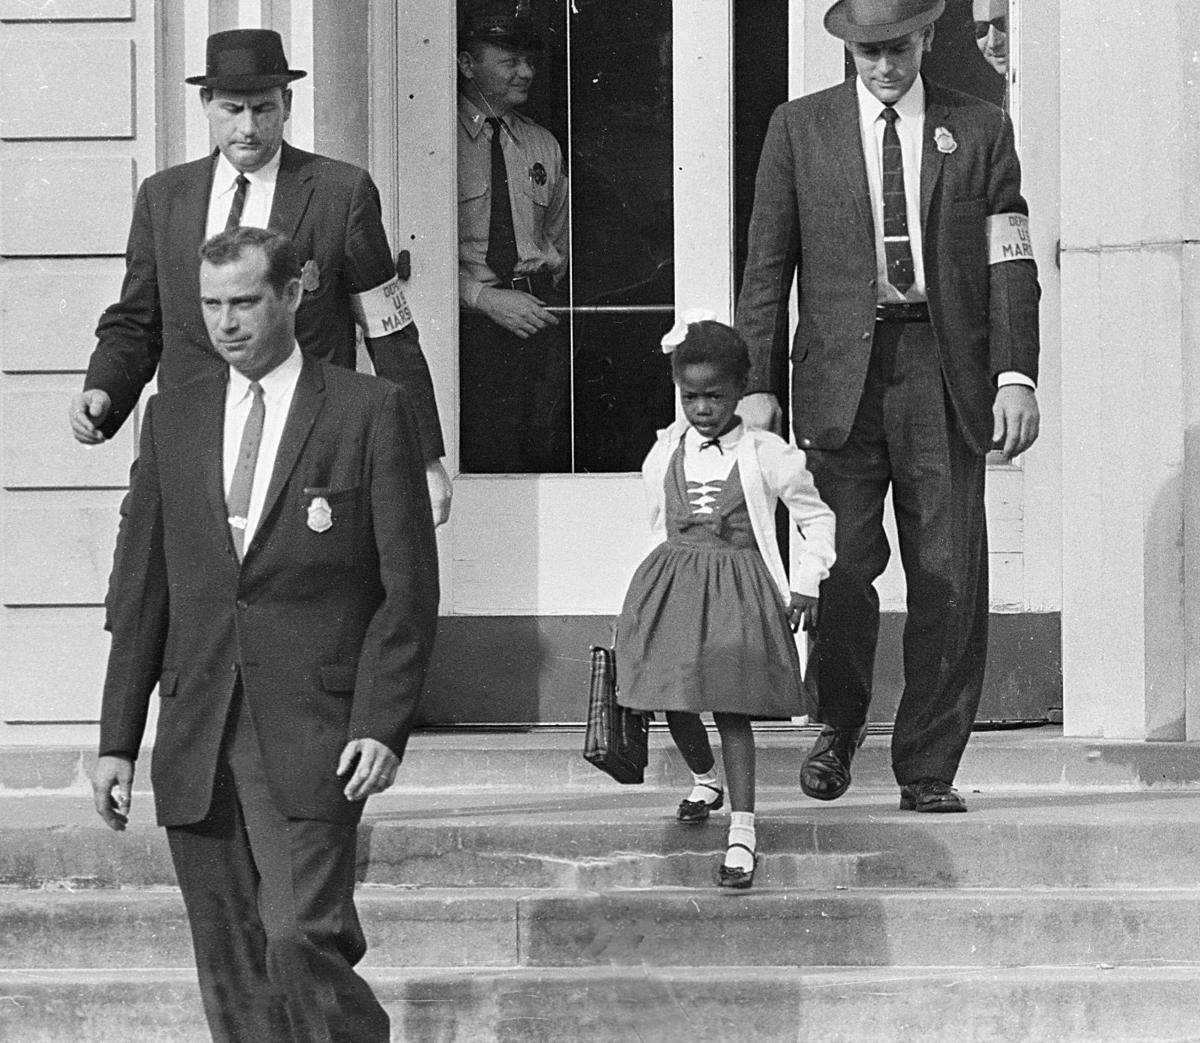 Ruby Bridges, the first African-American to attend a white elementary school in the deep South, 1960.

On the morning of November 14, 1960, federal marshals drove Ruby and her mother five blocks to her new school. While in the car, one of the men explained that when they arrived at the school, two marshals would walk in front of Ruby and two would be behind her.
As soon as Bridges entered the school, white parents pulled their own children out; all the teachers refused to teach while a black child was enrolled. Only one person agreed to teach Ruby and that was Barbara Henry, from Boston, Massachusetts, and for over a year Henry taught her alone, “as if she were teaching a whole class”.
That first day, Bridges and her adult companions spent the entire day in the principal’s office; the chaos of the school prevented their moving to the classroom until the second day. On the second day, however, a white student broke the boycott and entered the school when a 34-year-old Methodist minister, Lloyd Anderson Foreman, walked his 5-year-old daughter Pam through the angry mob, saying, “I simply want the privilege of taking my child to school…”.
A few days later, other white parents began bringing their children, and the protests began to subside. Every morning, as Bridges walked to school, one woman would threaten to poison her; because of this, the U.S. Marshals dispatched by President Eisenhower, who were overseeing her safety, allowed Ruby to eat only the food that she brought from home.
The Bridges family suffered for their decision to send her to William Frantz Elementary: her father lost his job, the grocery store the family shopped at would no longer let them shop there, and her grandparents, who were sharecroppers in Mississippi, were turned off their land. She has noted that many others in the community, both black and white, showed support in a variety of ways. Some white families continued to send their children to Frantz despite the protests, a neighbor provided her father with a new job, and local people babysat, watched the house as protectors, and walked behind the federal marshals’ car on the trips to school.